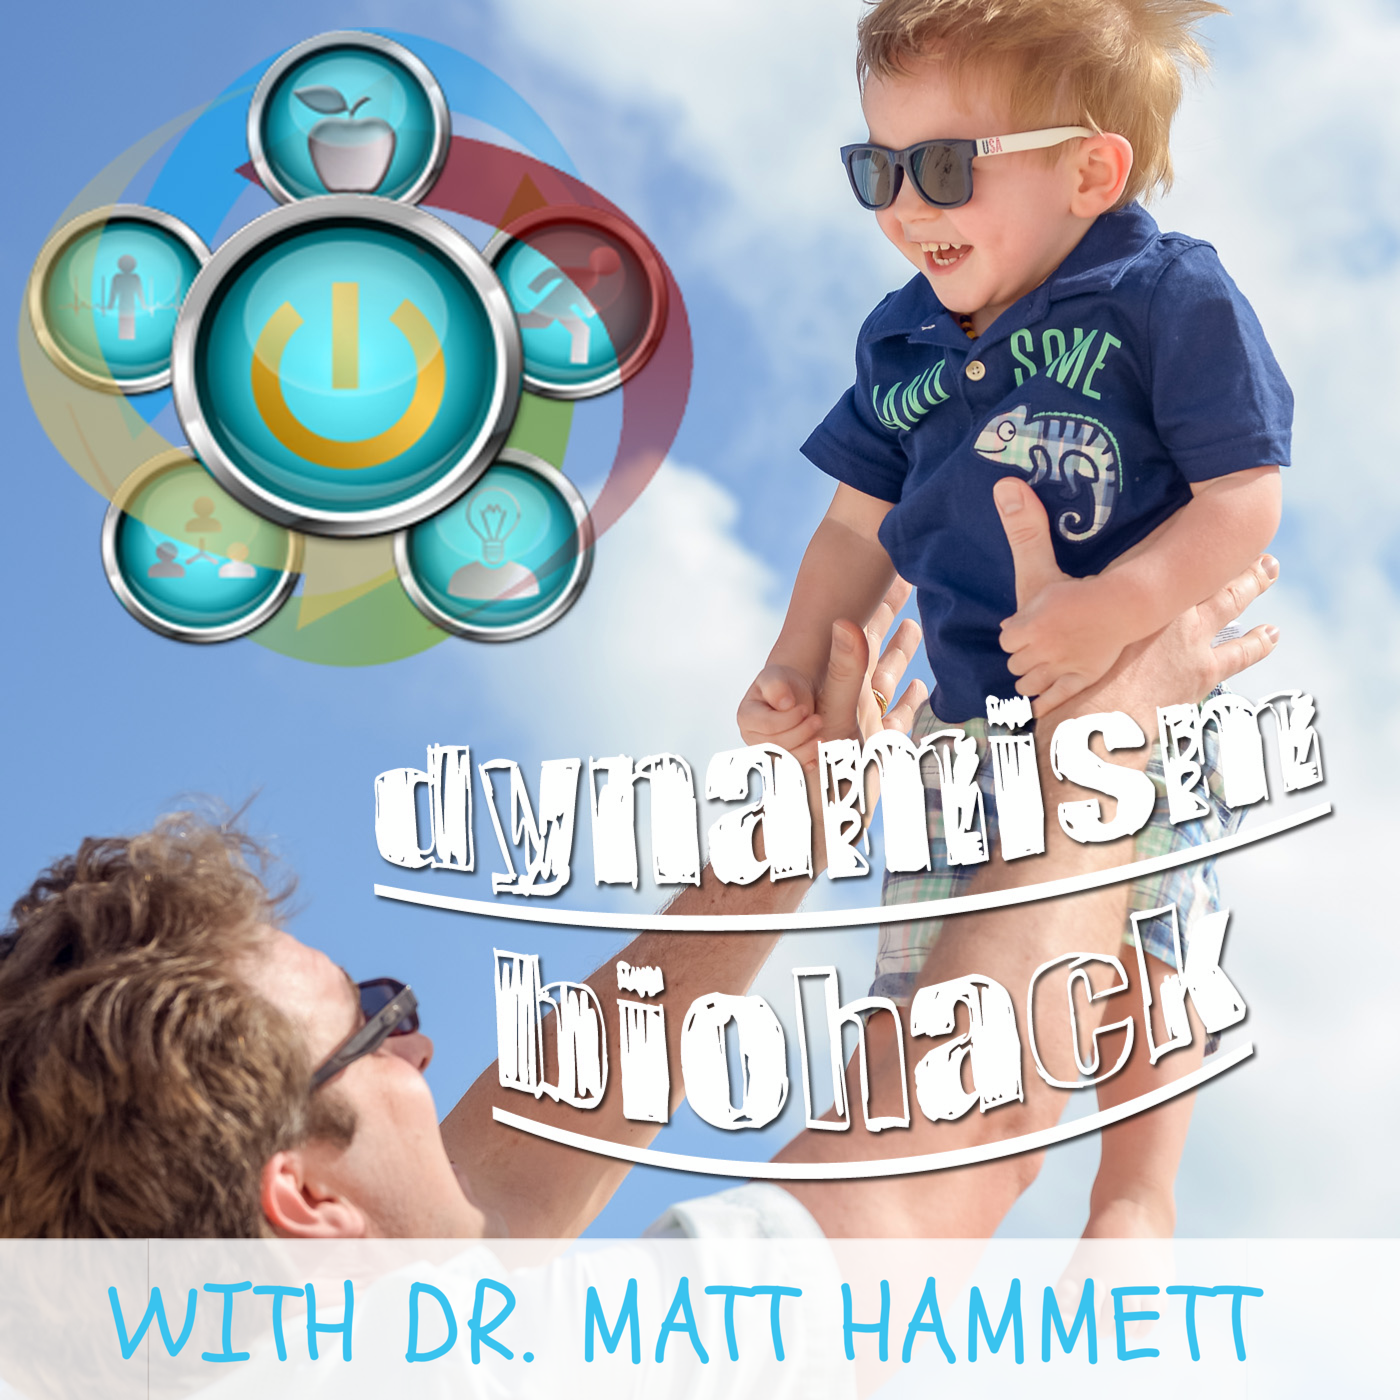 Dynamism Biohack Podcast: How to Make the Right Nutritious Choices Despite Conflicting Expert Opinions